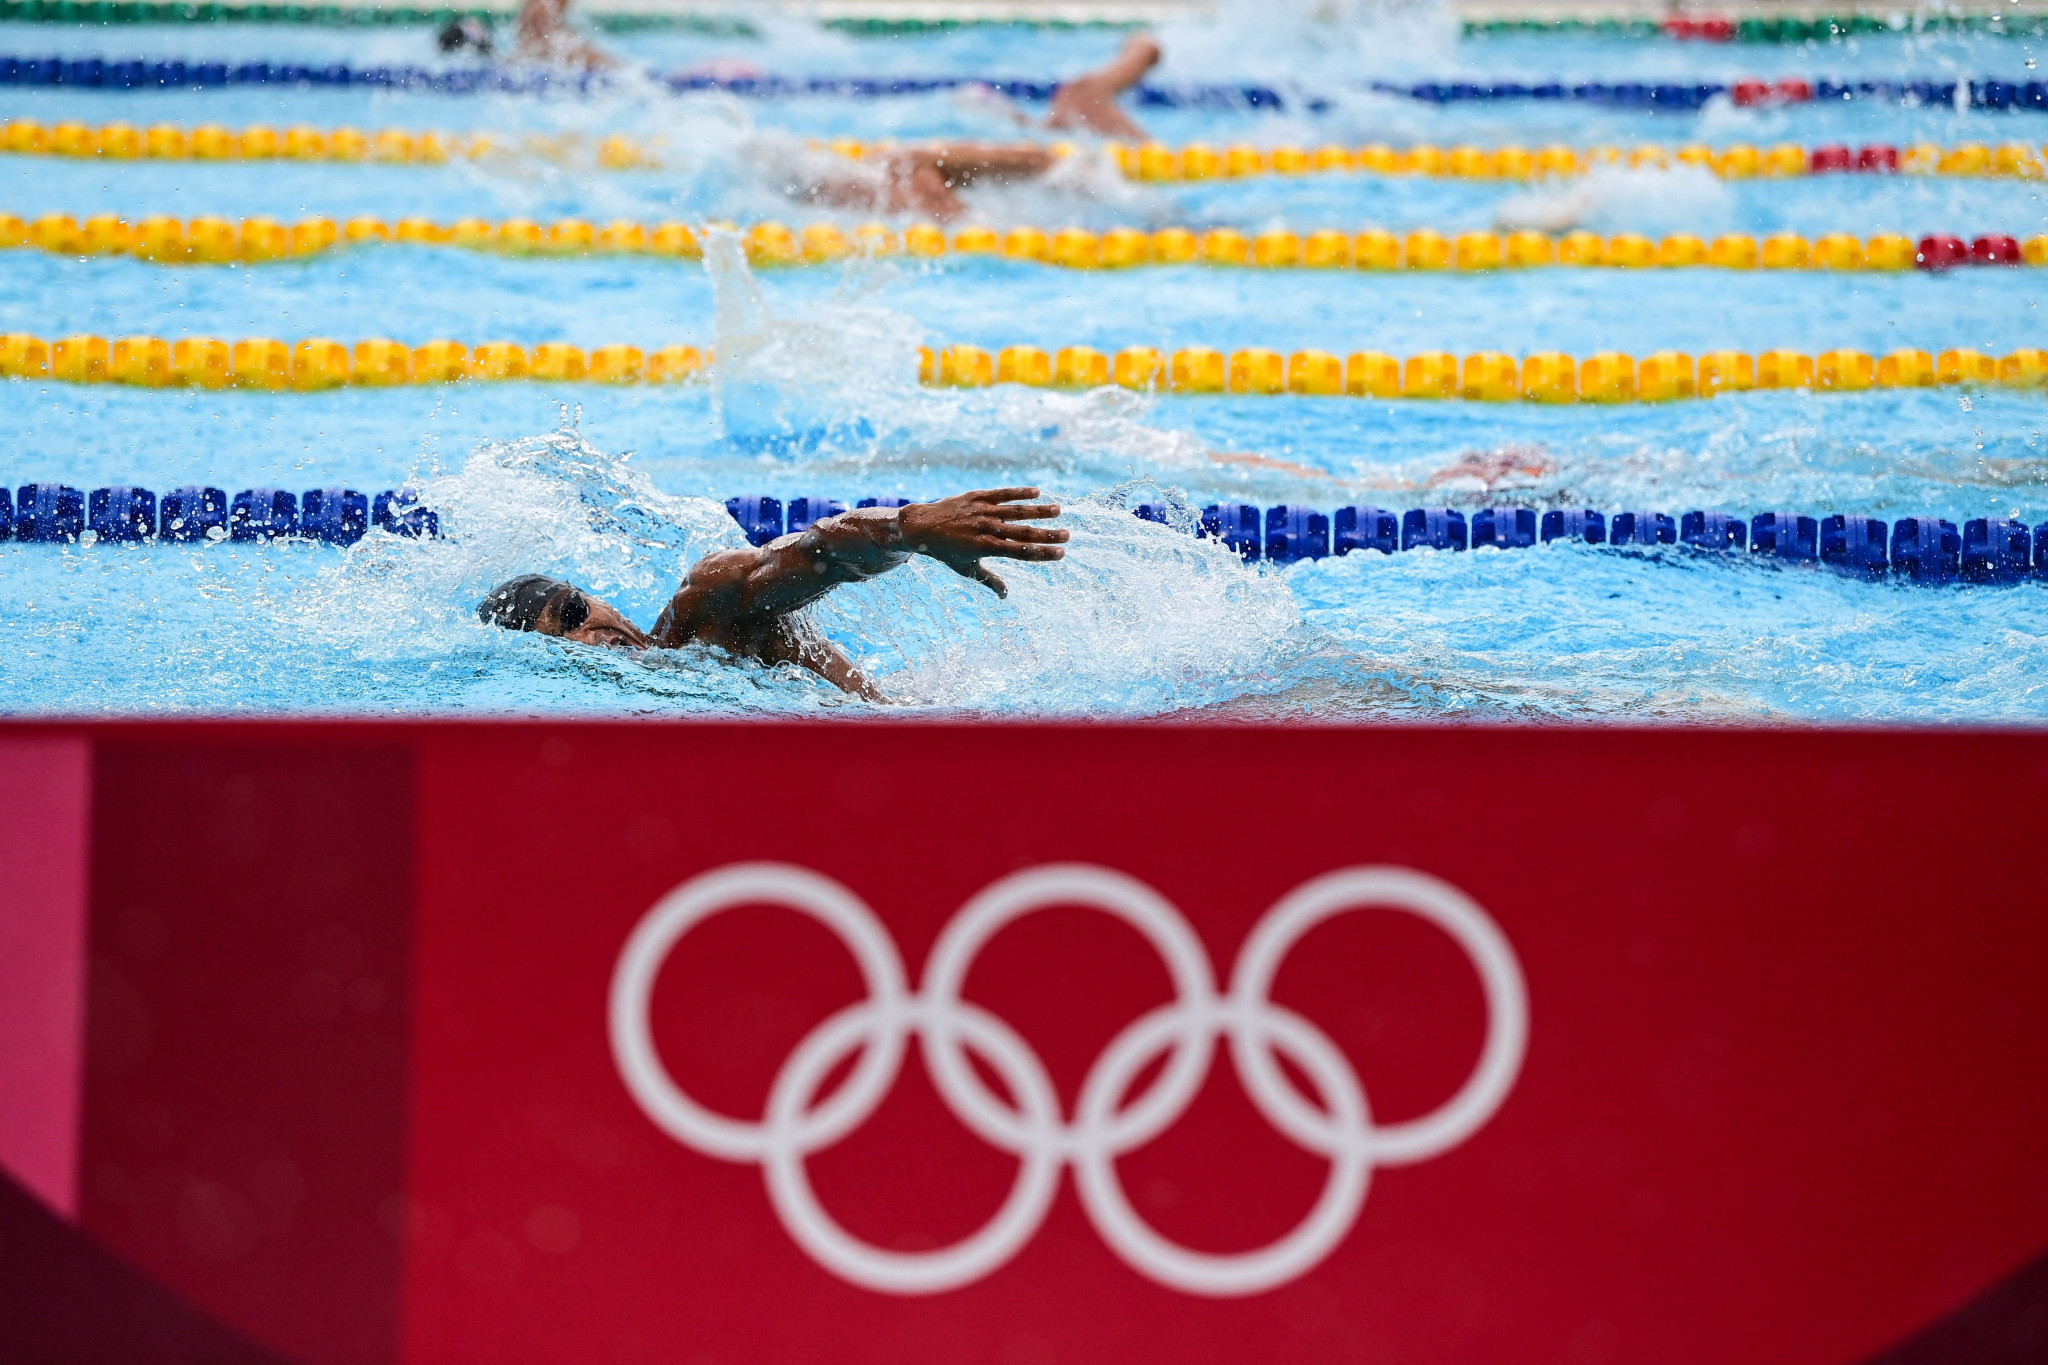 American swimmer Austin Levingston said that allegations of child sexual abuse in 2018 dashed his chances of qualifying for Tokyo 2020 ©Getty Images